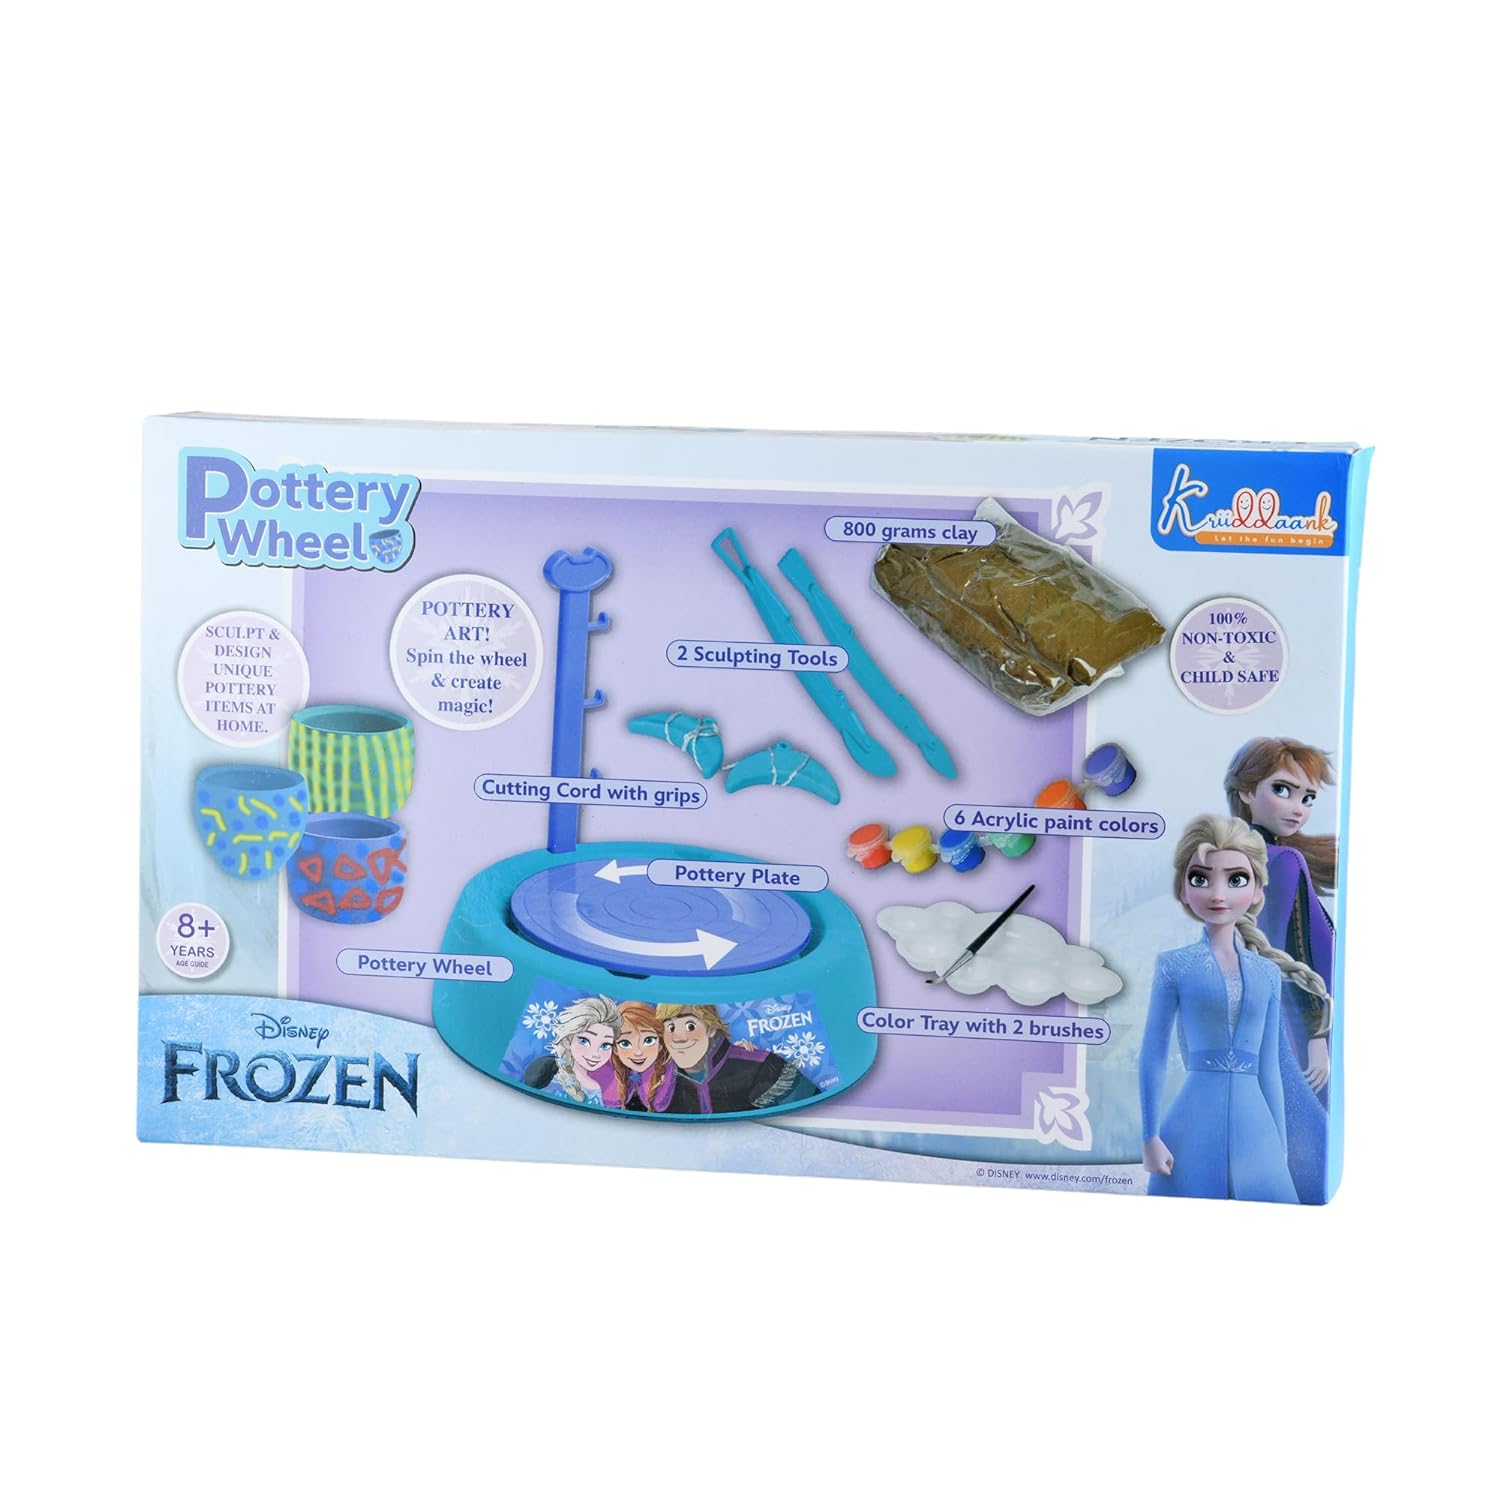 Disney Frozen Pottery Wheel Battery Operated with Molding Clay & Painting Kit Learning and Education Multicolor Board Game Toys for Kids